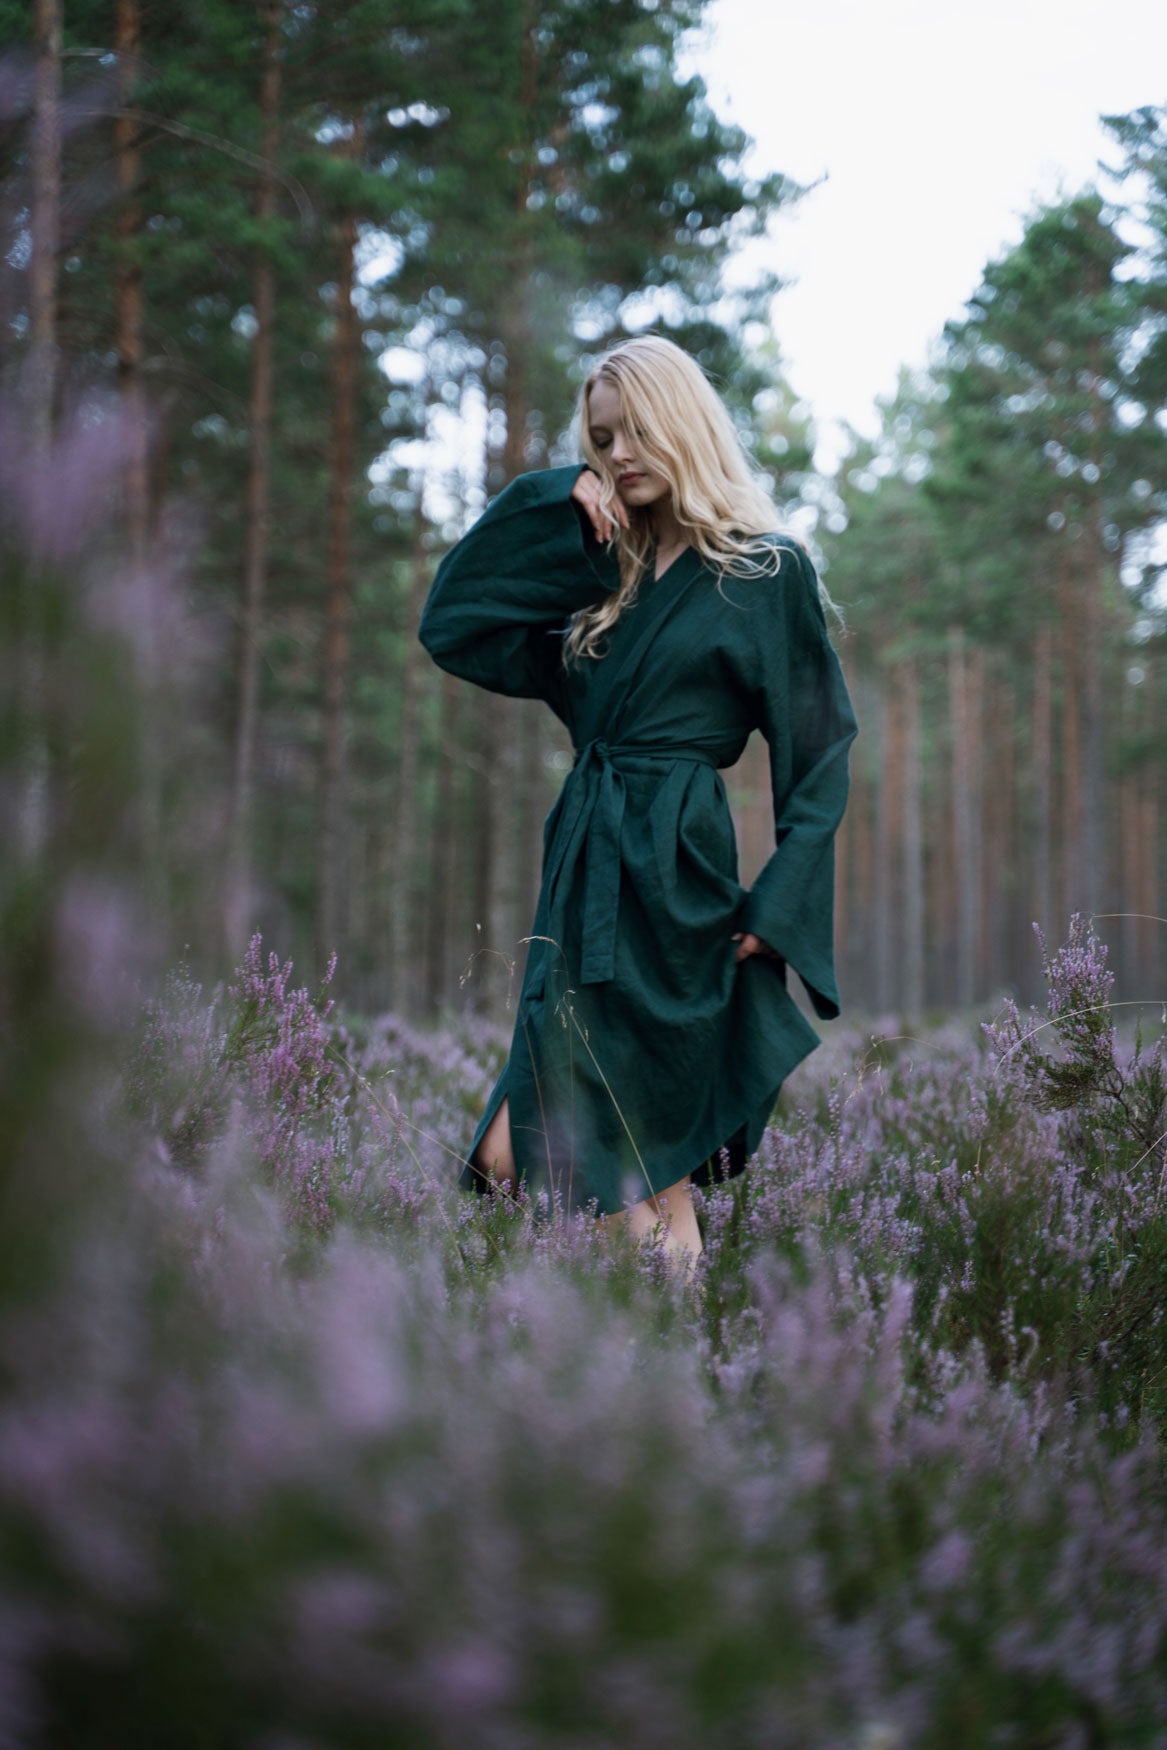 Organic, sustainable and sexy at the same time! Agasåga green kimono with long sleeves and belt. Knee length bathrobe. This robe is natural, soft, breathable and pure. It’s a conscious and healthy choice for your body and environment that embraces genuine selflove and selfcare. Handmade with love in the North.